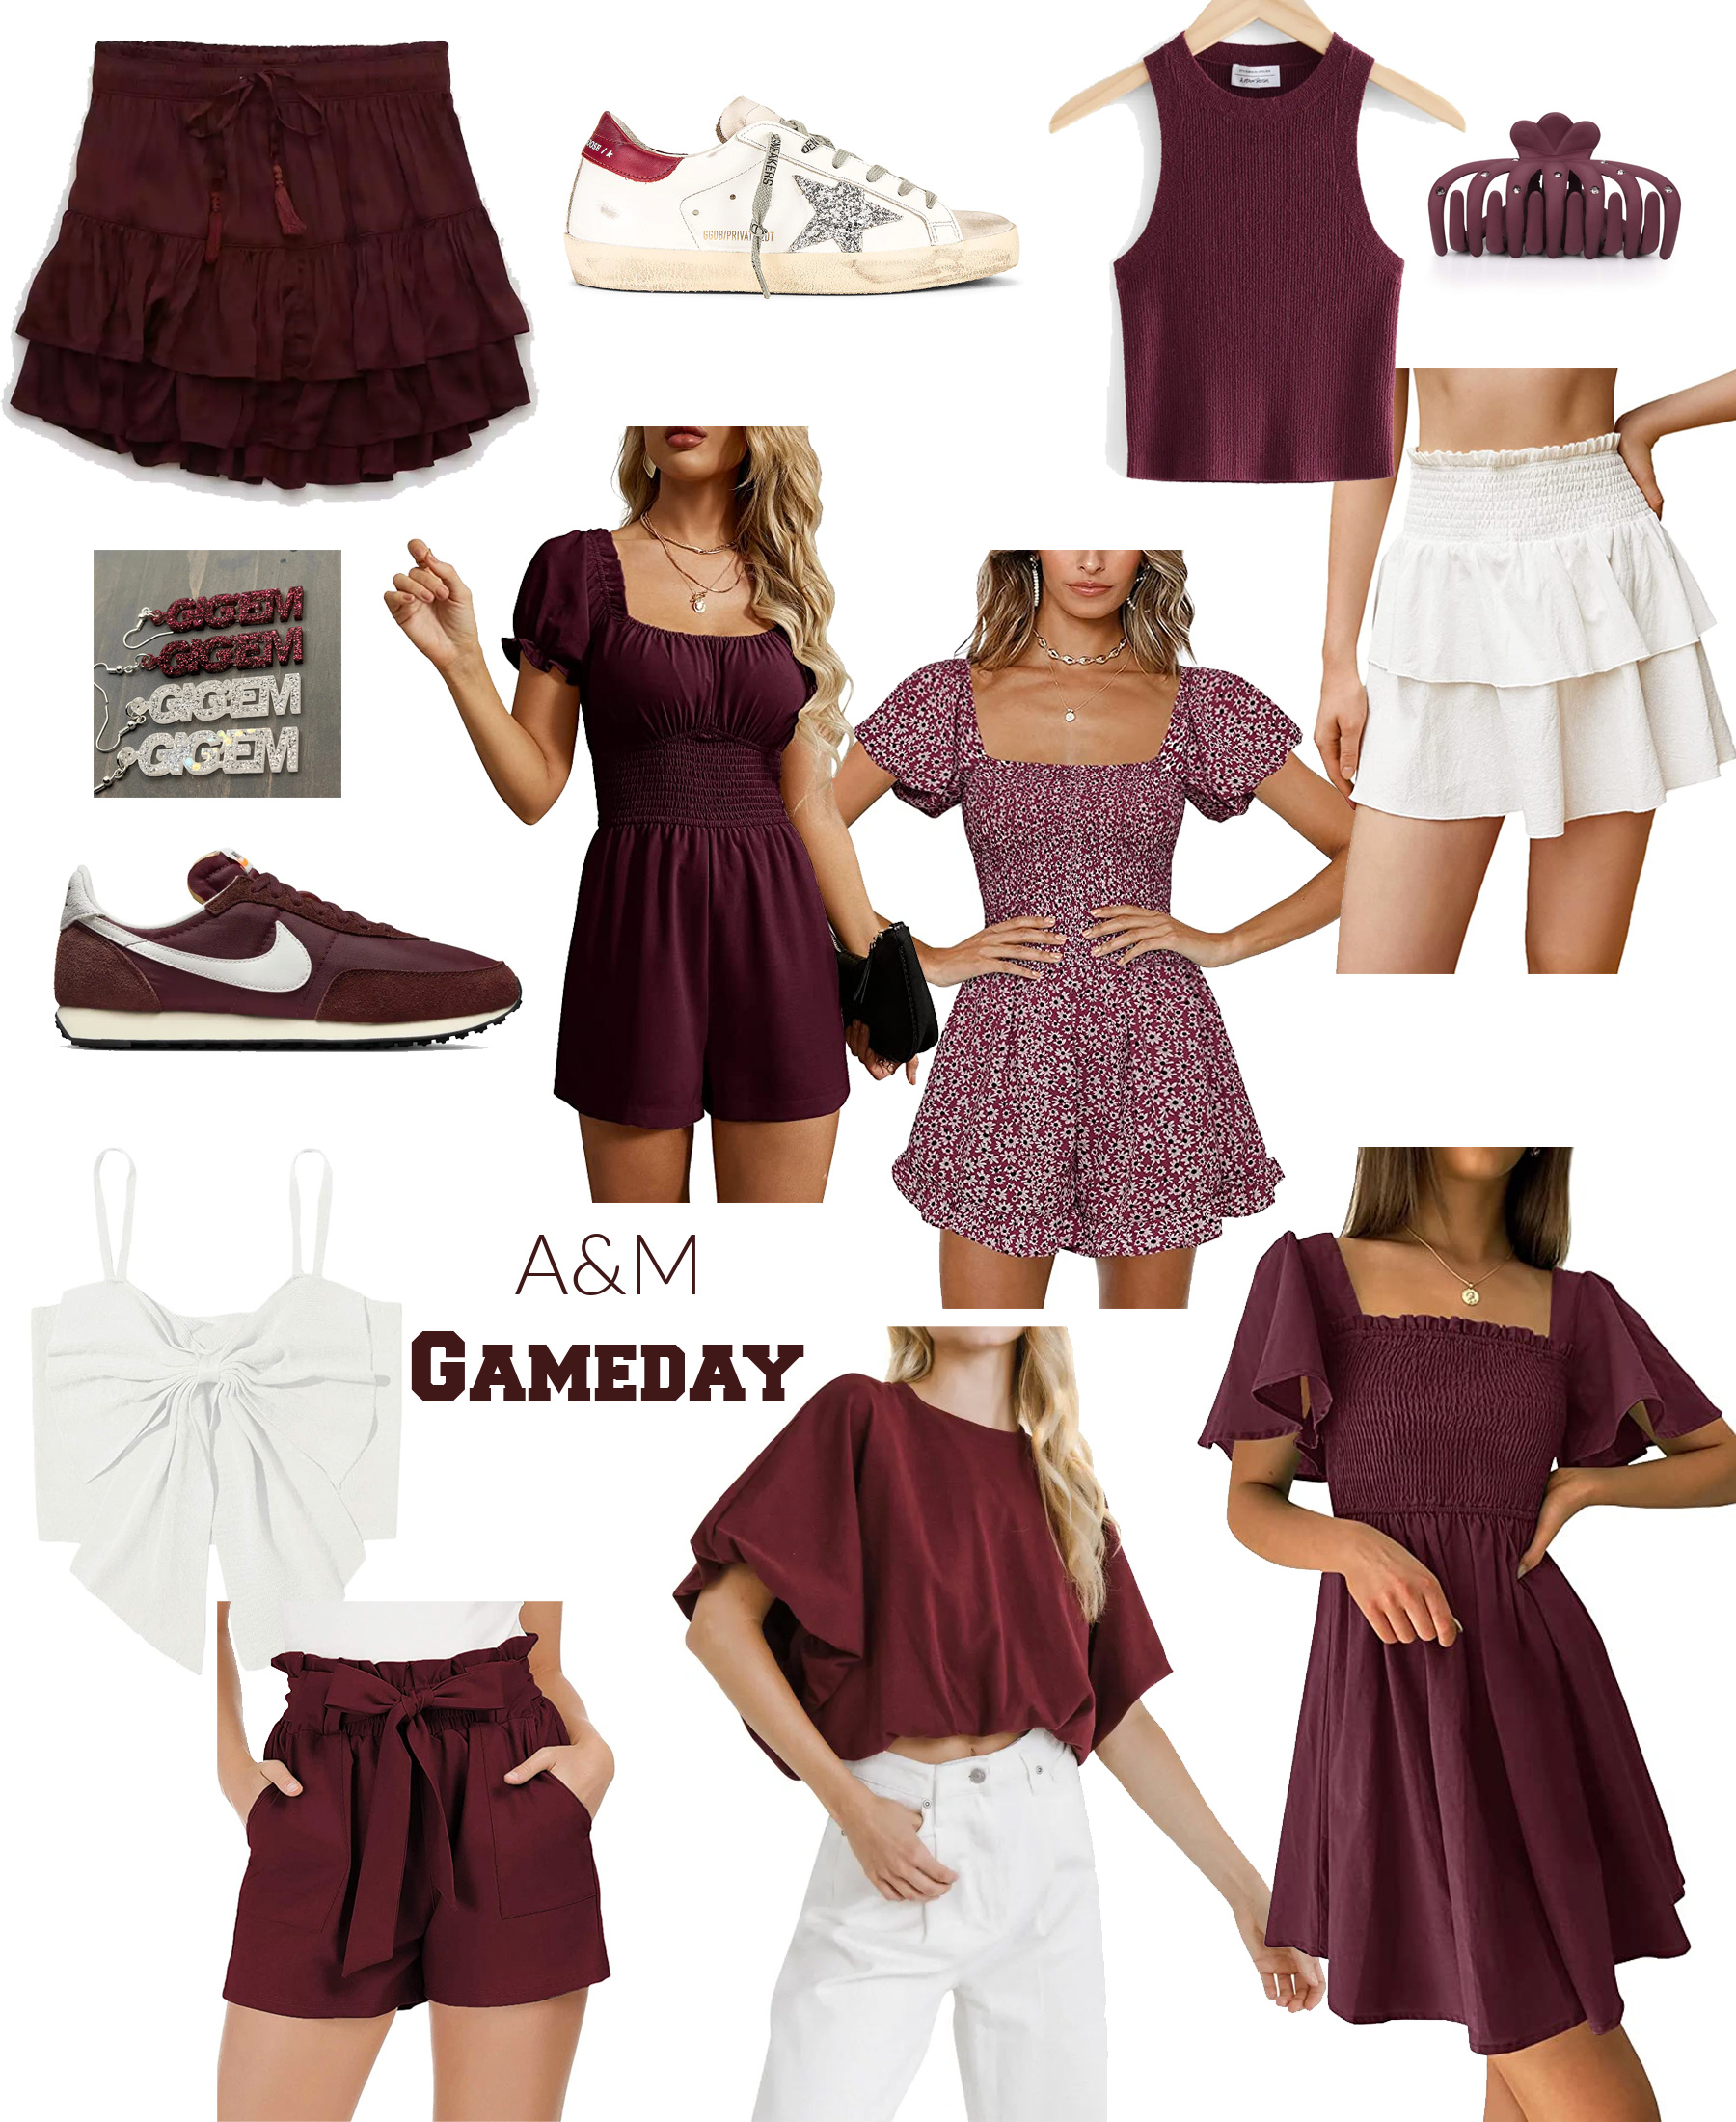 A&M-gameday-outfits